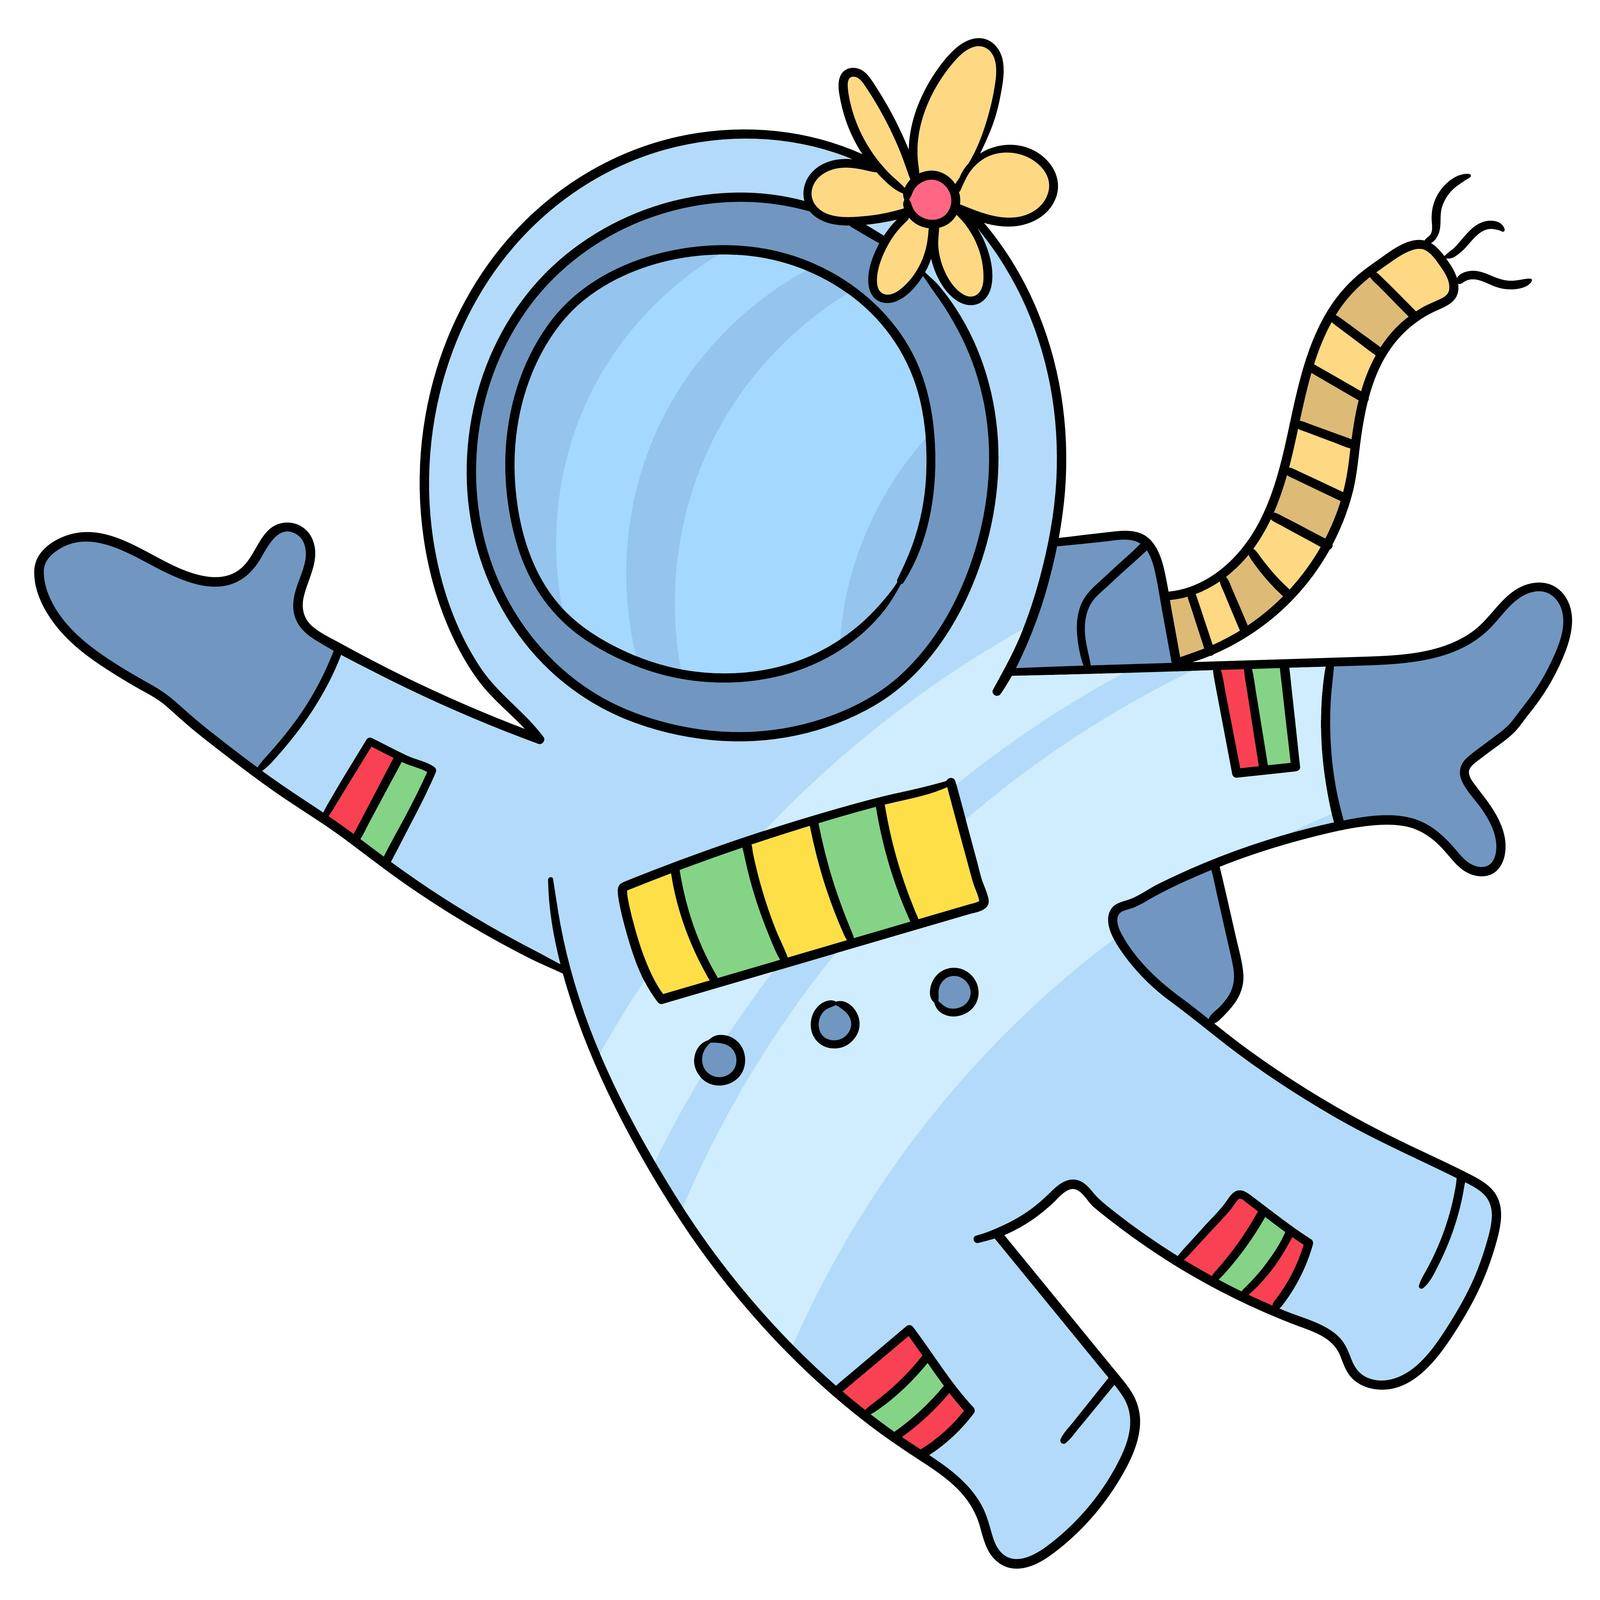 astronauts flying in outer space. doodle icon image. cartoon caharacter cute doodle draw